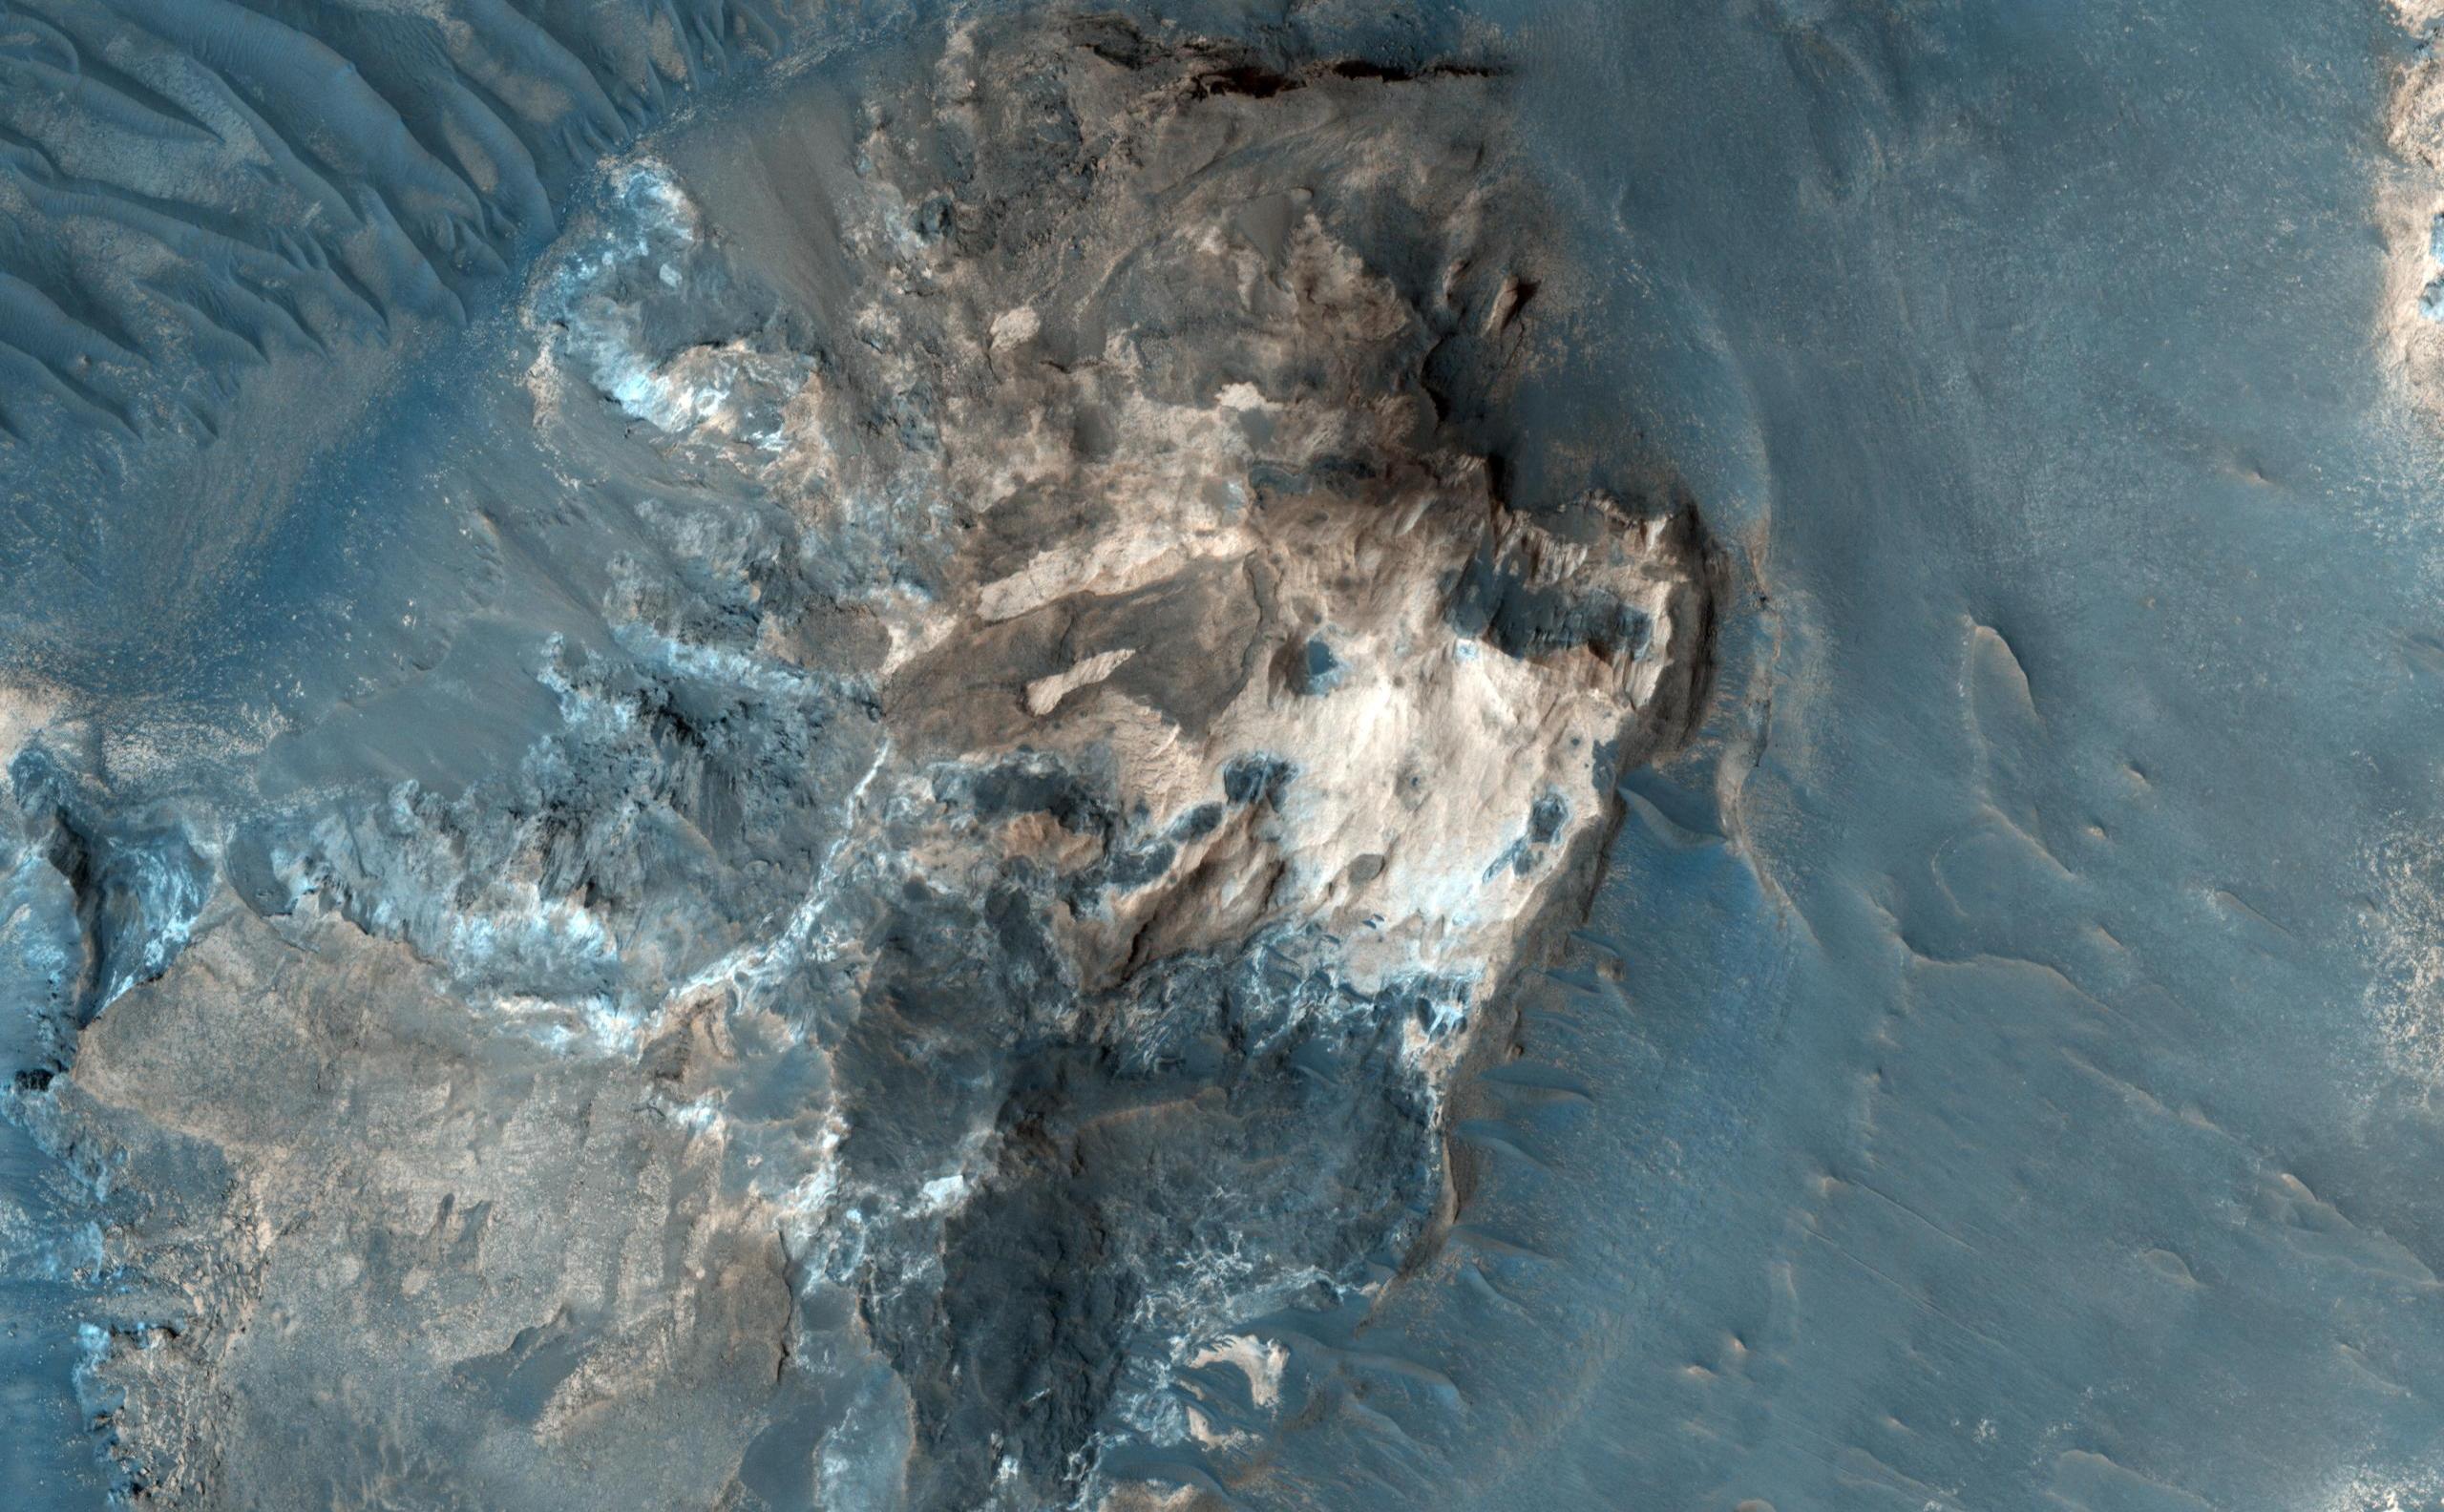 The formation of the large outflow channels on Mars have been attributed to catastrophic discharges of ground water. Many of the channels start in areas where the ground has apparently collapsed: the surface is now well below the surrounding undisturbed ground. Within the collapsed region, blocks of undisturbed material can often be seen and this has led to such regions being called chaotic terrain.In Aureum Chaos, the OMEGA experiment on Mars Express indicated the presence of phyllosilicates (clay minerals) which have been detected in a variety of bright outcrops and scarps. The subimage shows such an outcrop in a chaotic terrain region. At the highest resolution, layering can be seen. The image will be used to assess at what stage in Mars's history these clays minerals were formed and how.The area referred to as Aureum Chaos is located at 334 degrees East, 4 degrees South on the West side of the Margaritifer Terra region of Mars.